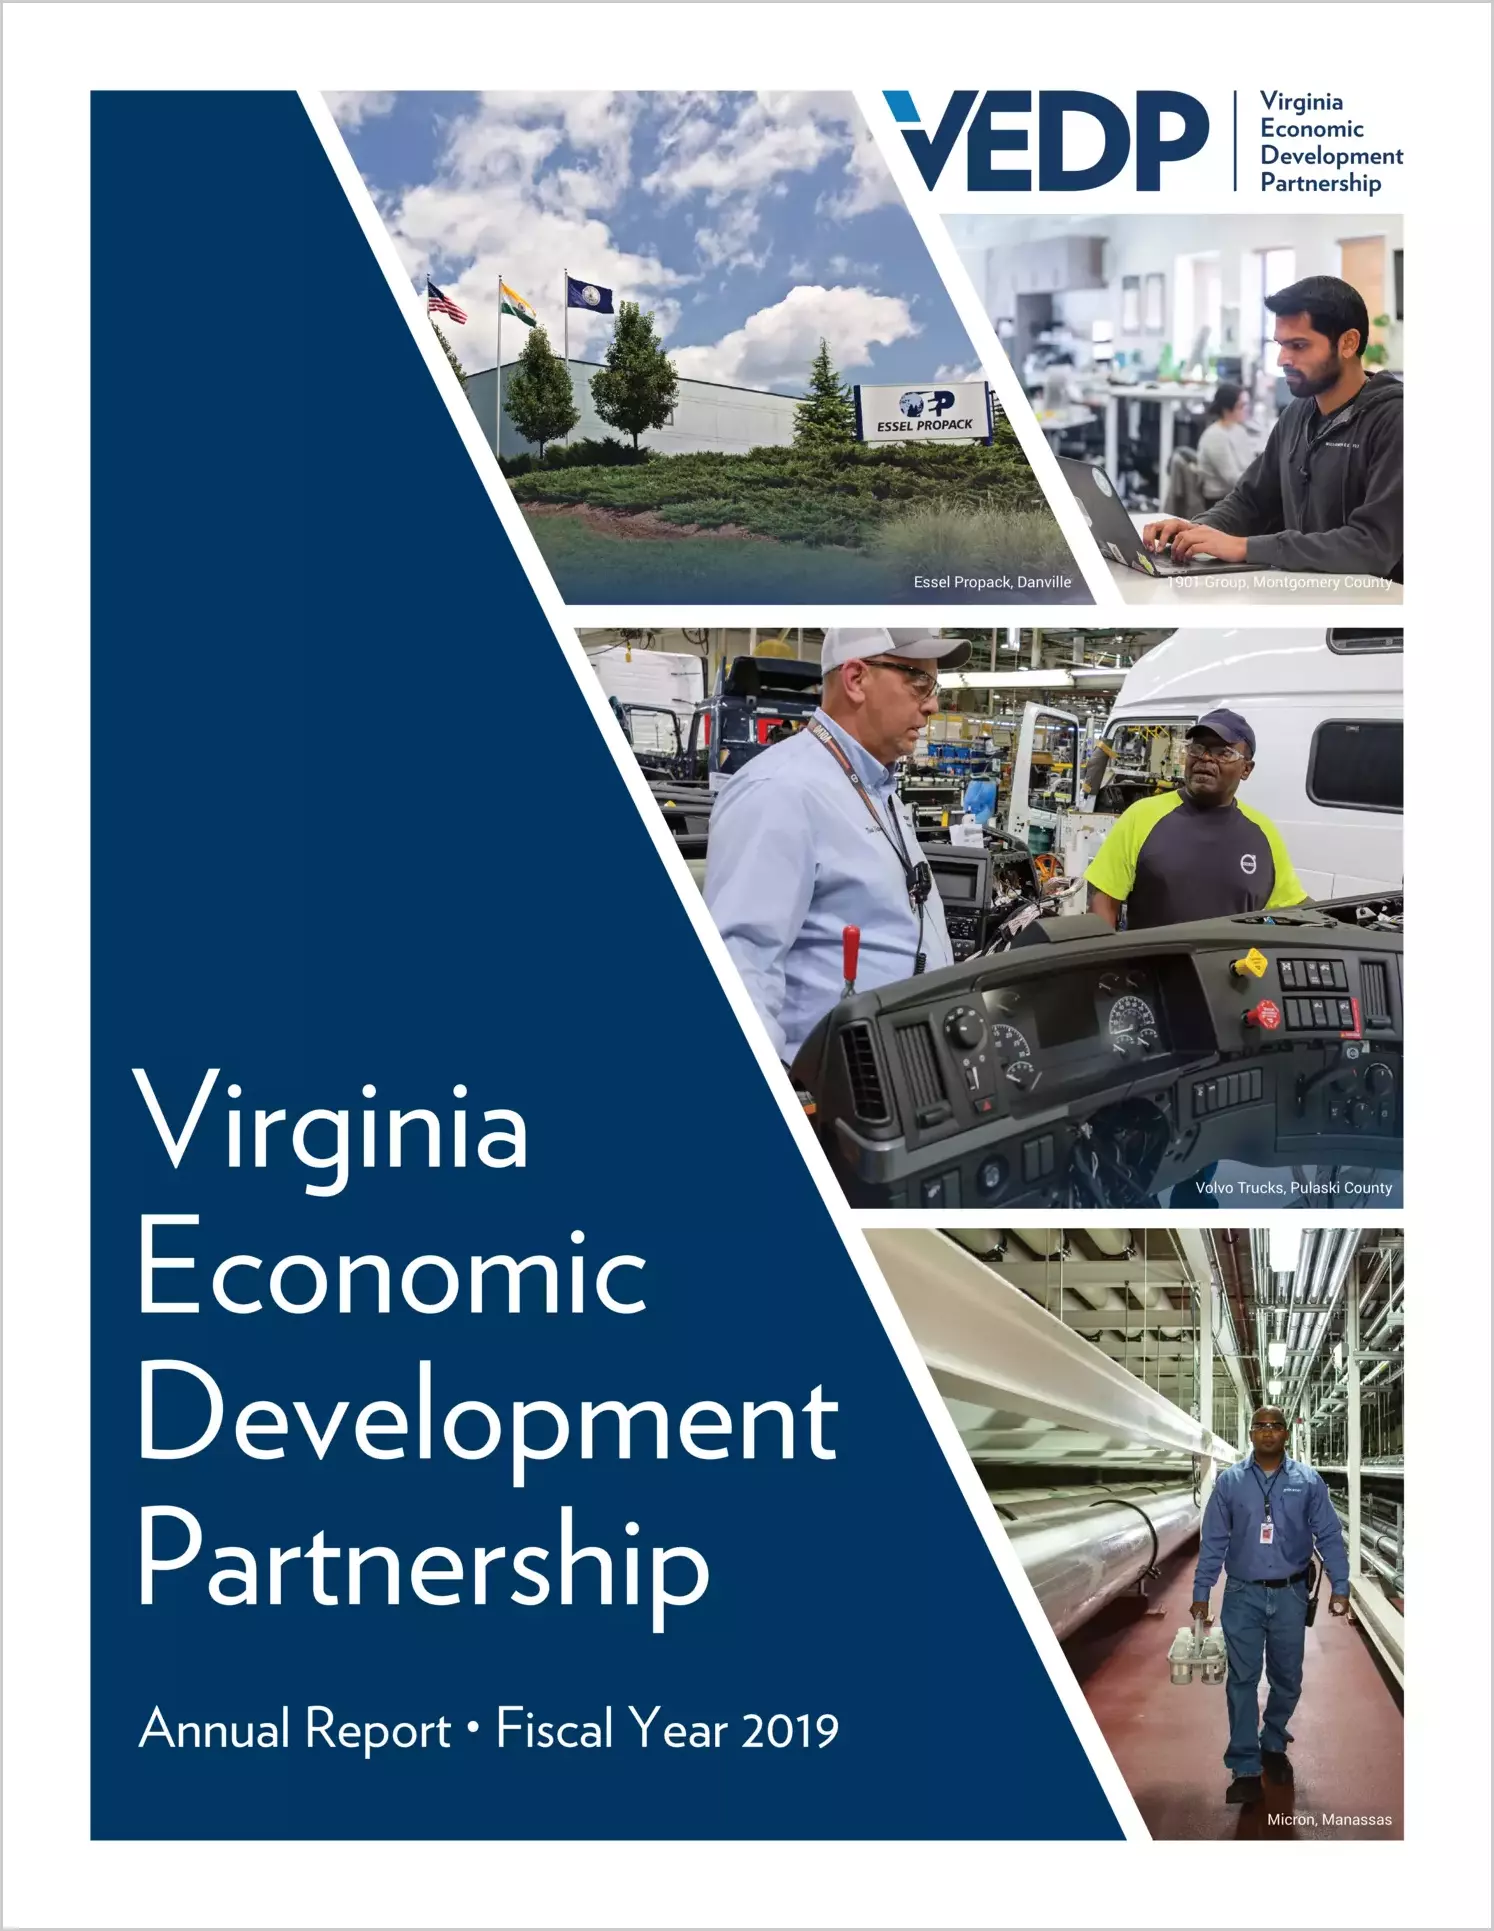 Virginia Economic Development Partnership Financial Statements for the year ended June 30, 2019